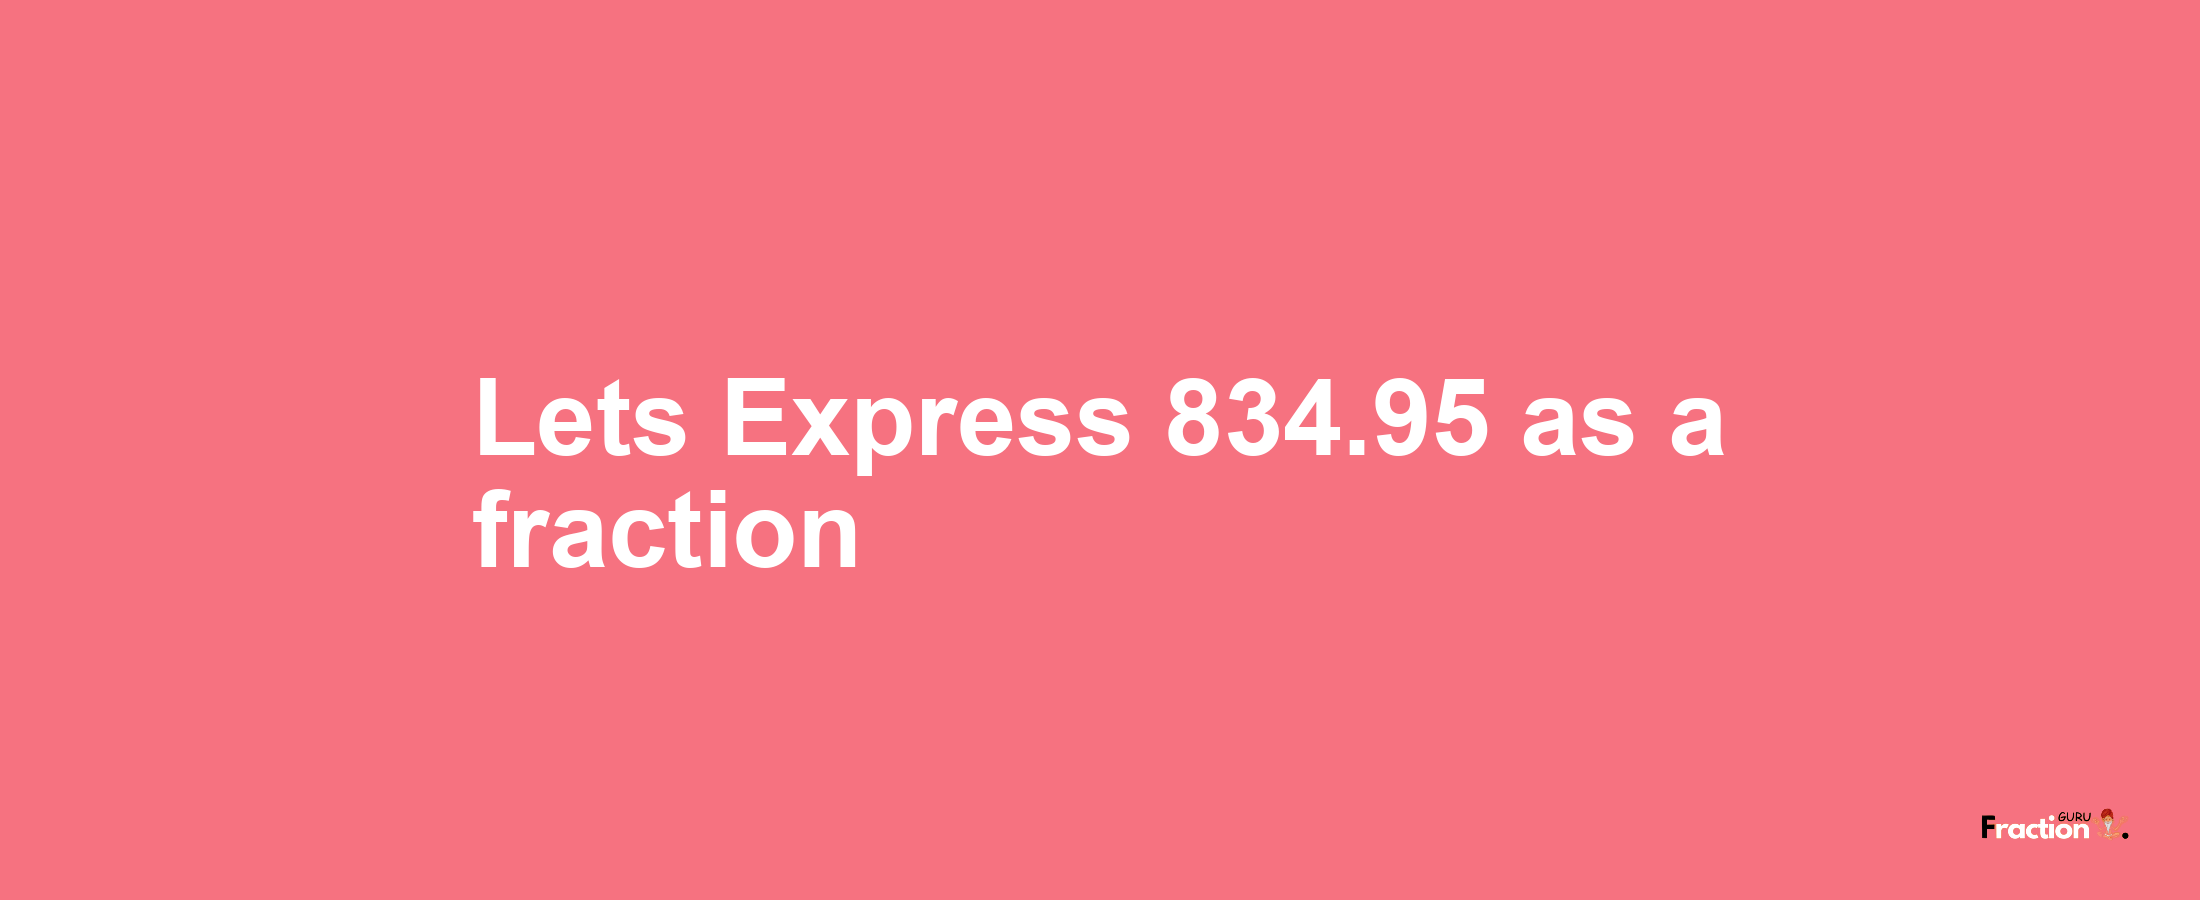 Lets Express 834.95 as afraction